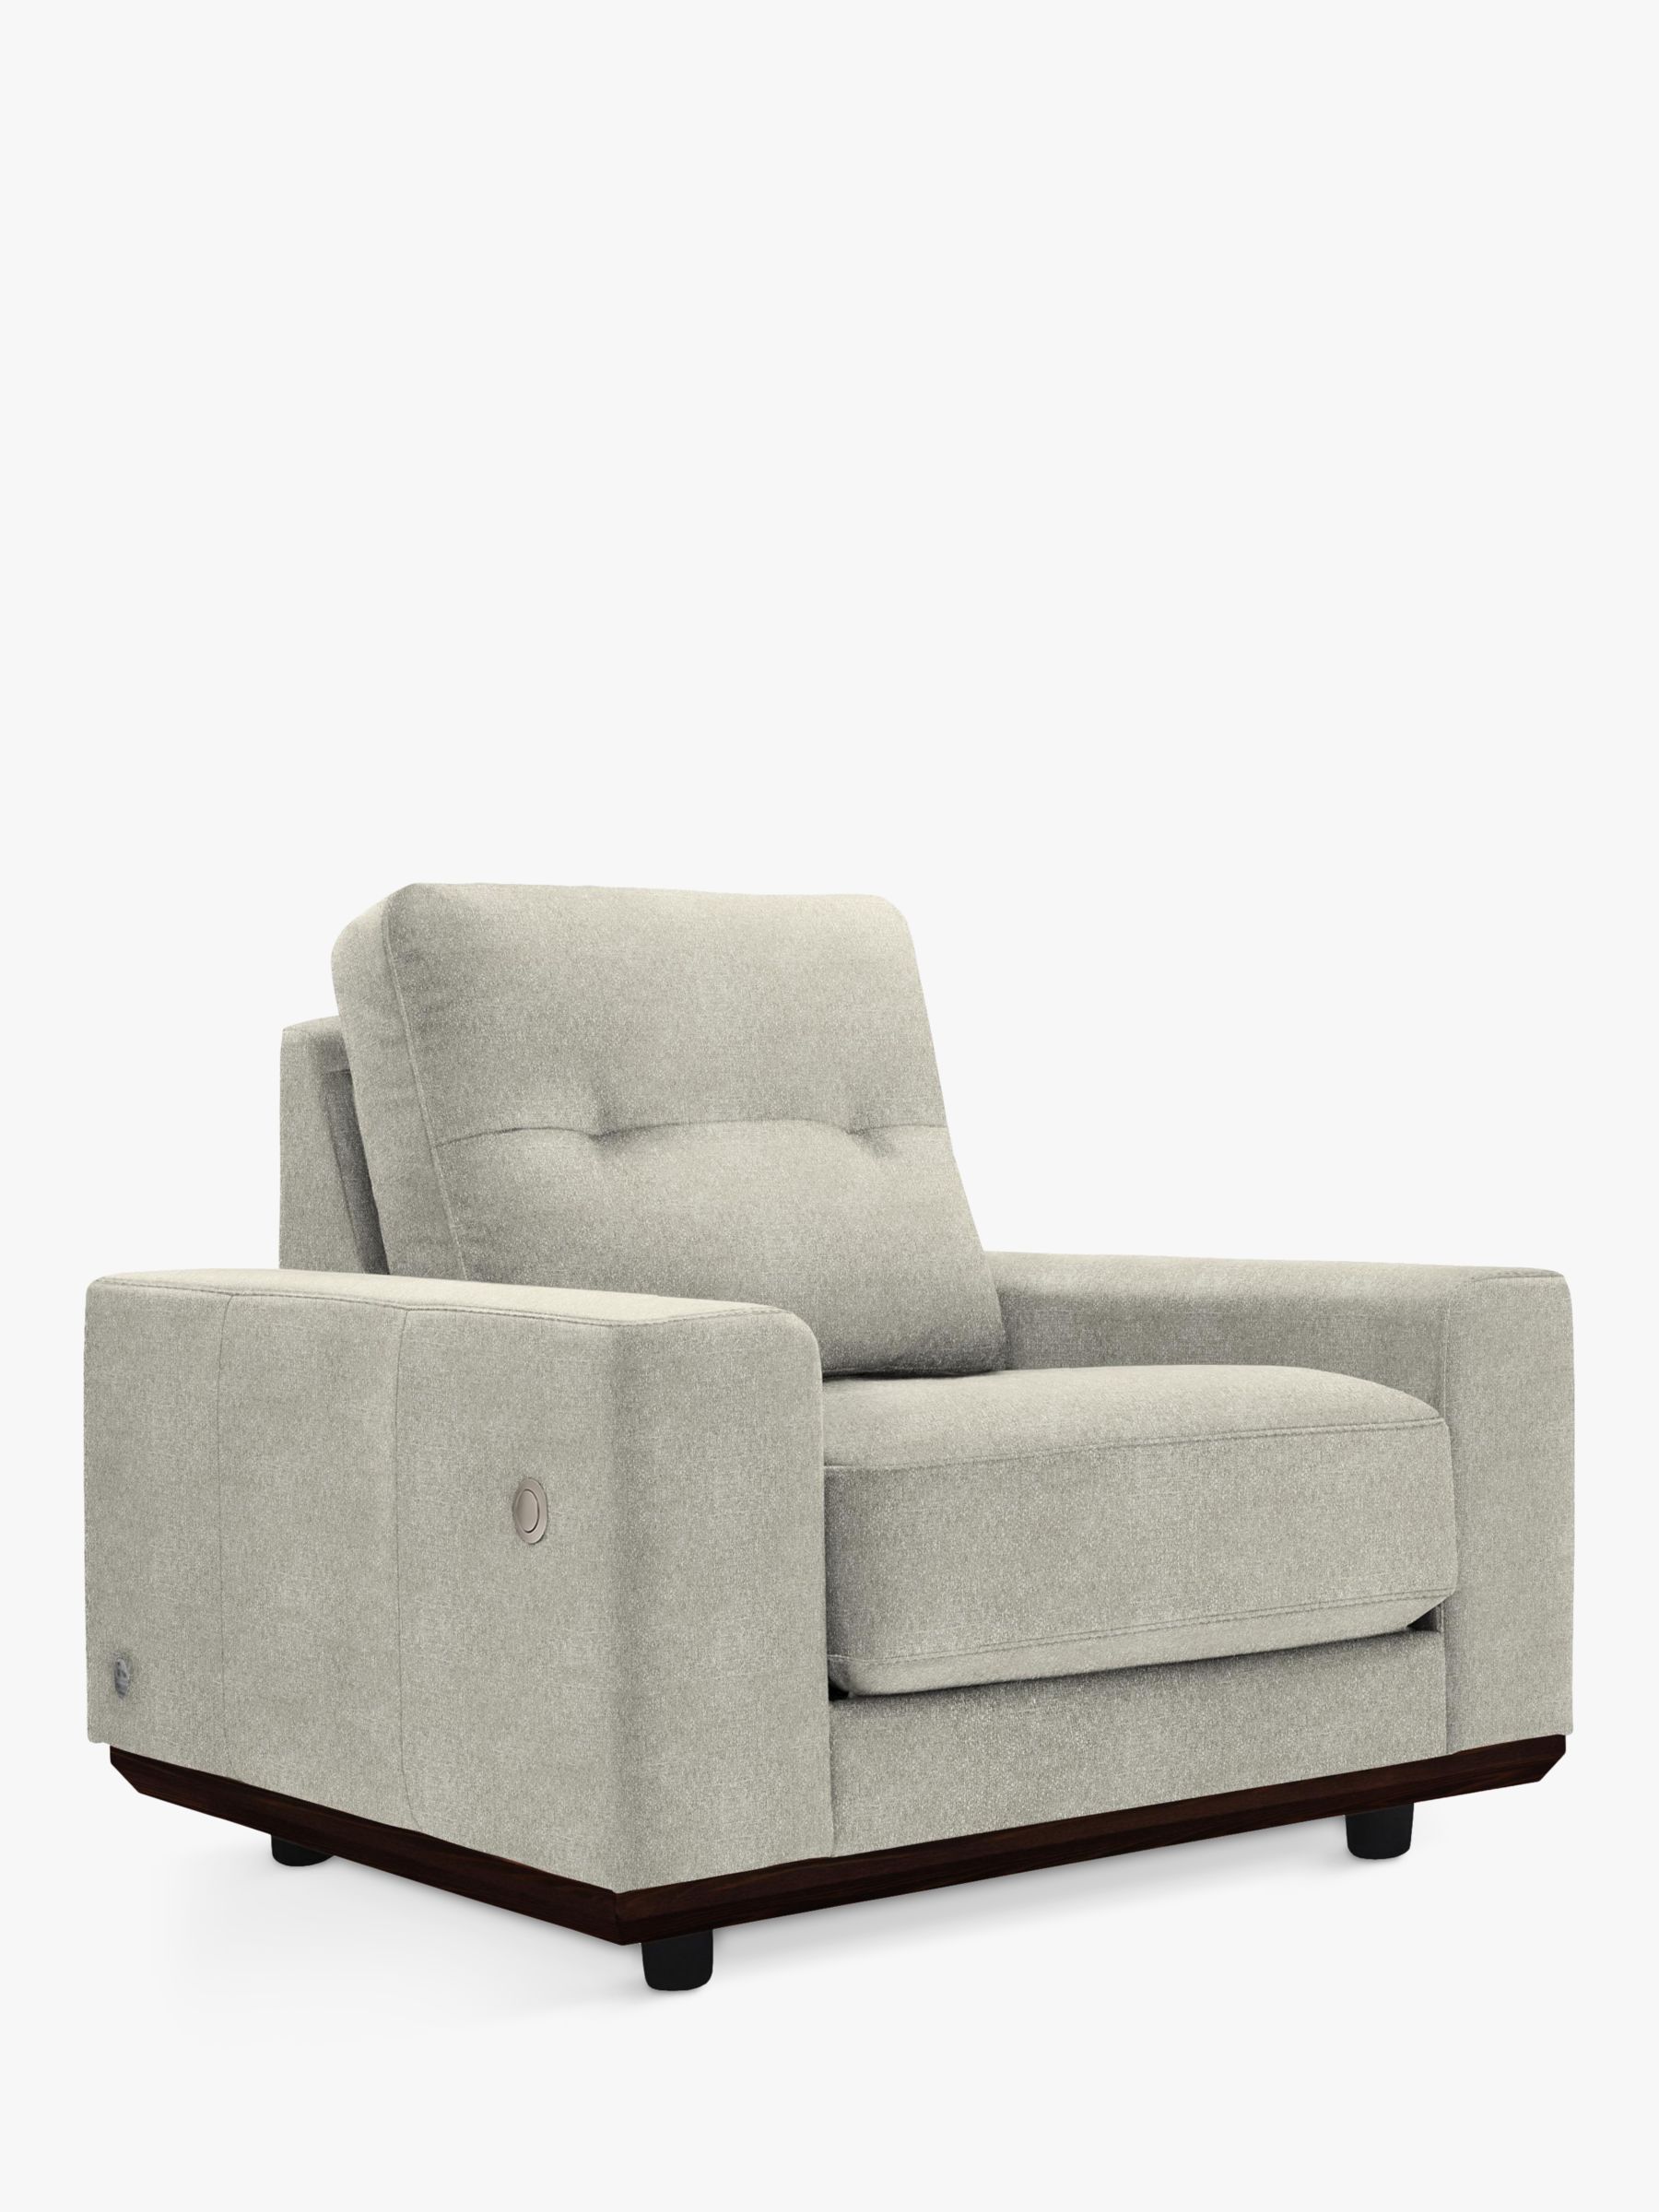 The Seventy One Range, G Plan Vintage The Seventy One with USB Charging Port Armchair, Sherbert Cloud